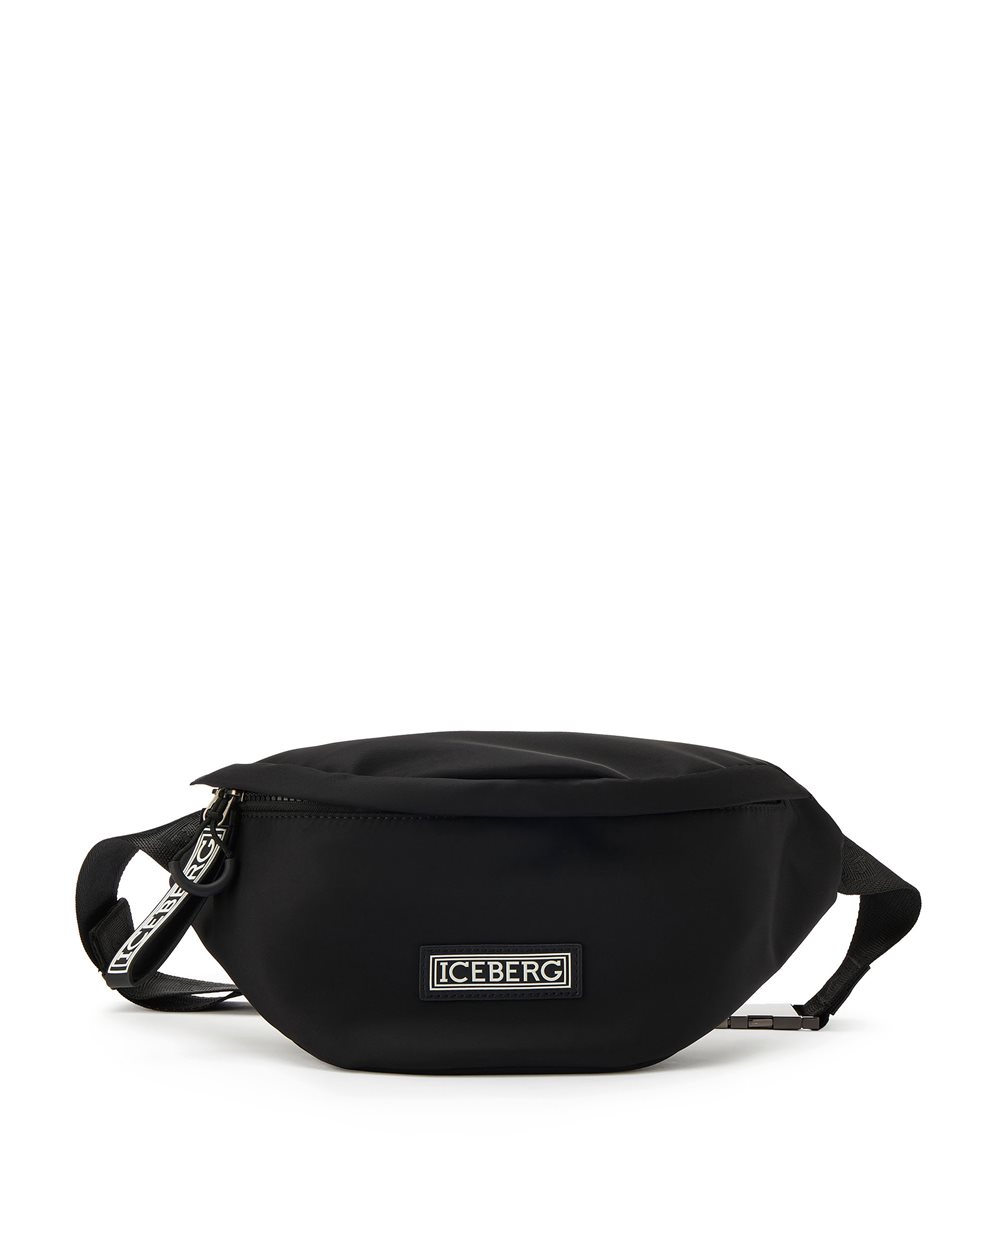 Nylon pouch with logo - ( SECONDO STEP IT ) PROMO SALDI UP TO 50% | Iceberg - Official Website